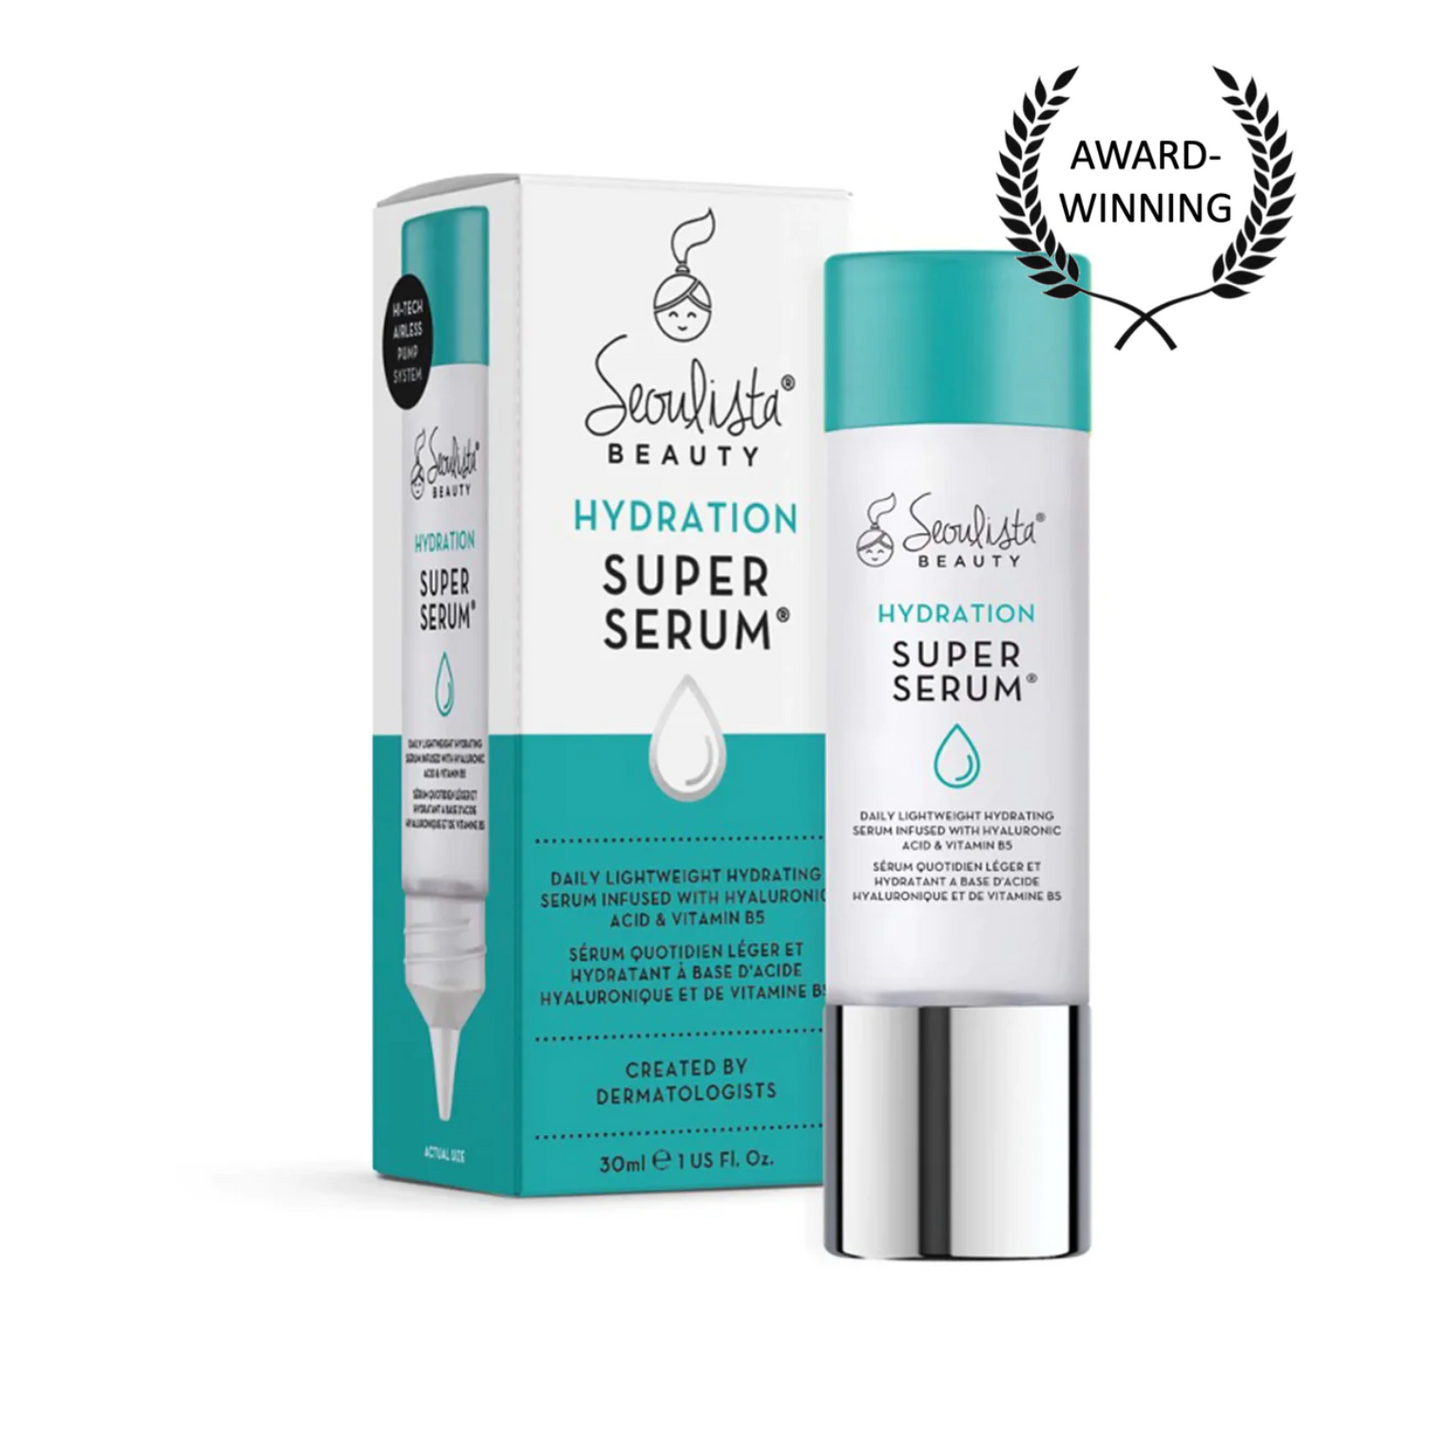 Seoulista Beauty® Supercharged Cryo Recovery Daily Skin System Super Serum